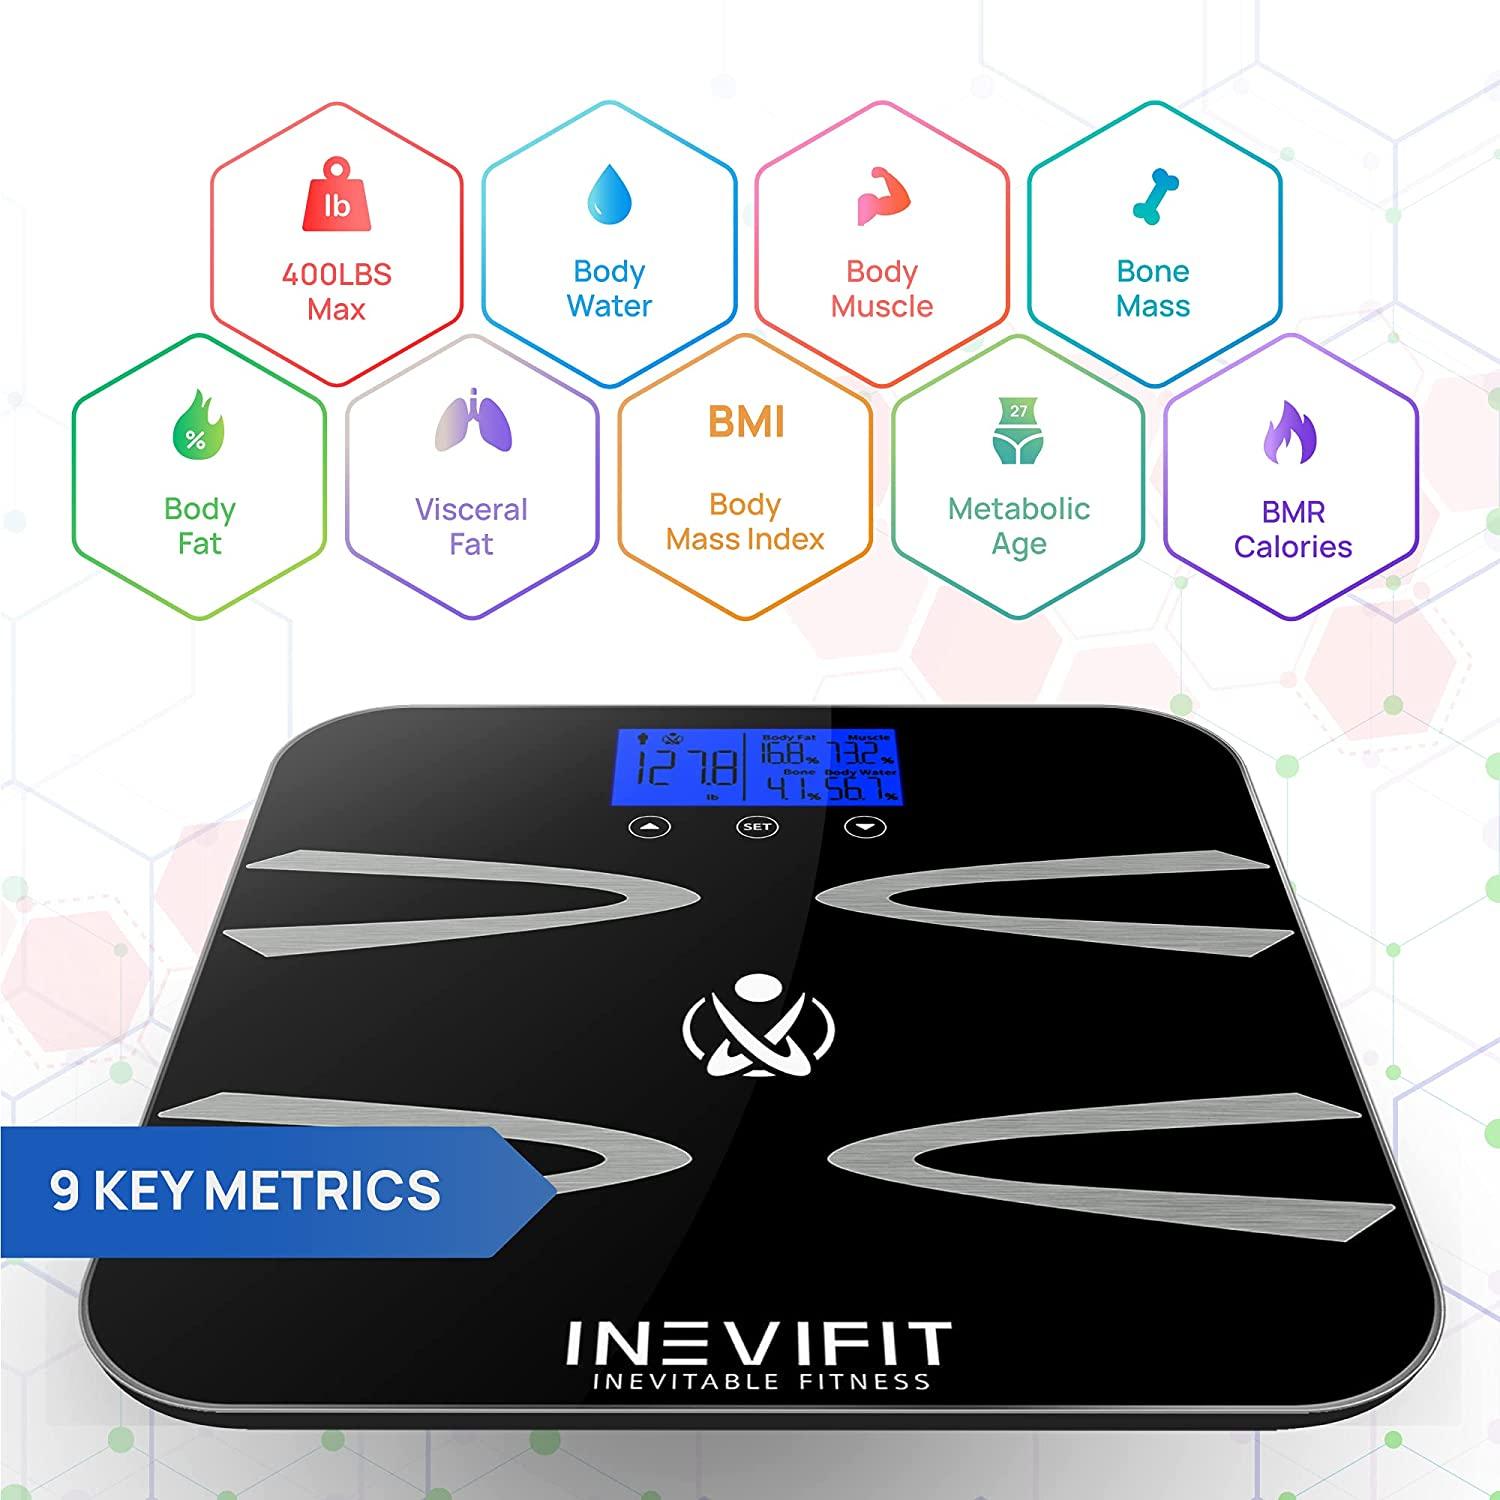 INEVIFIT Bathroom Scale, Highly Accurate Digital Bathroom Body Scale,  Measures Weight up to 400 lbs. Includes a 5-Year Warranty - White 